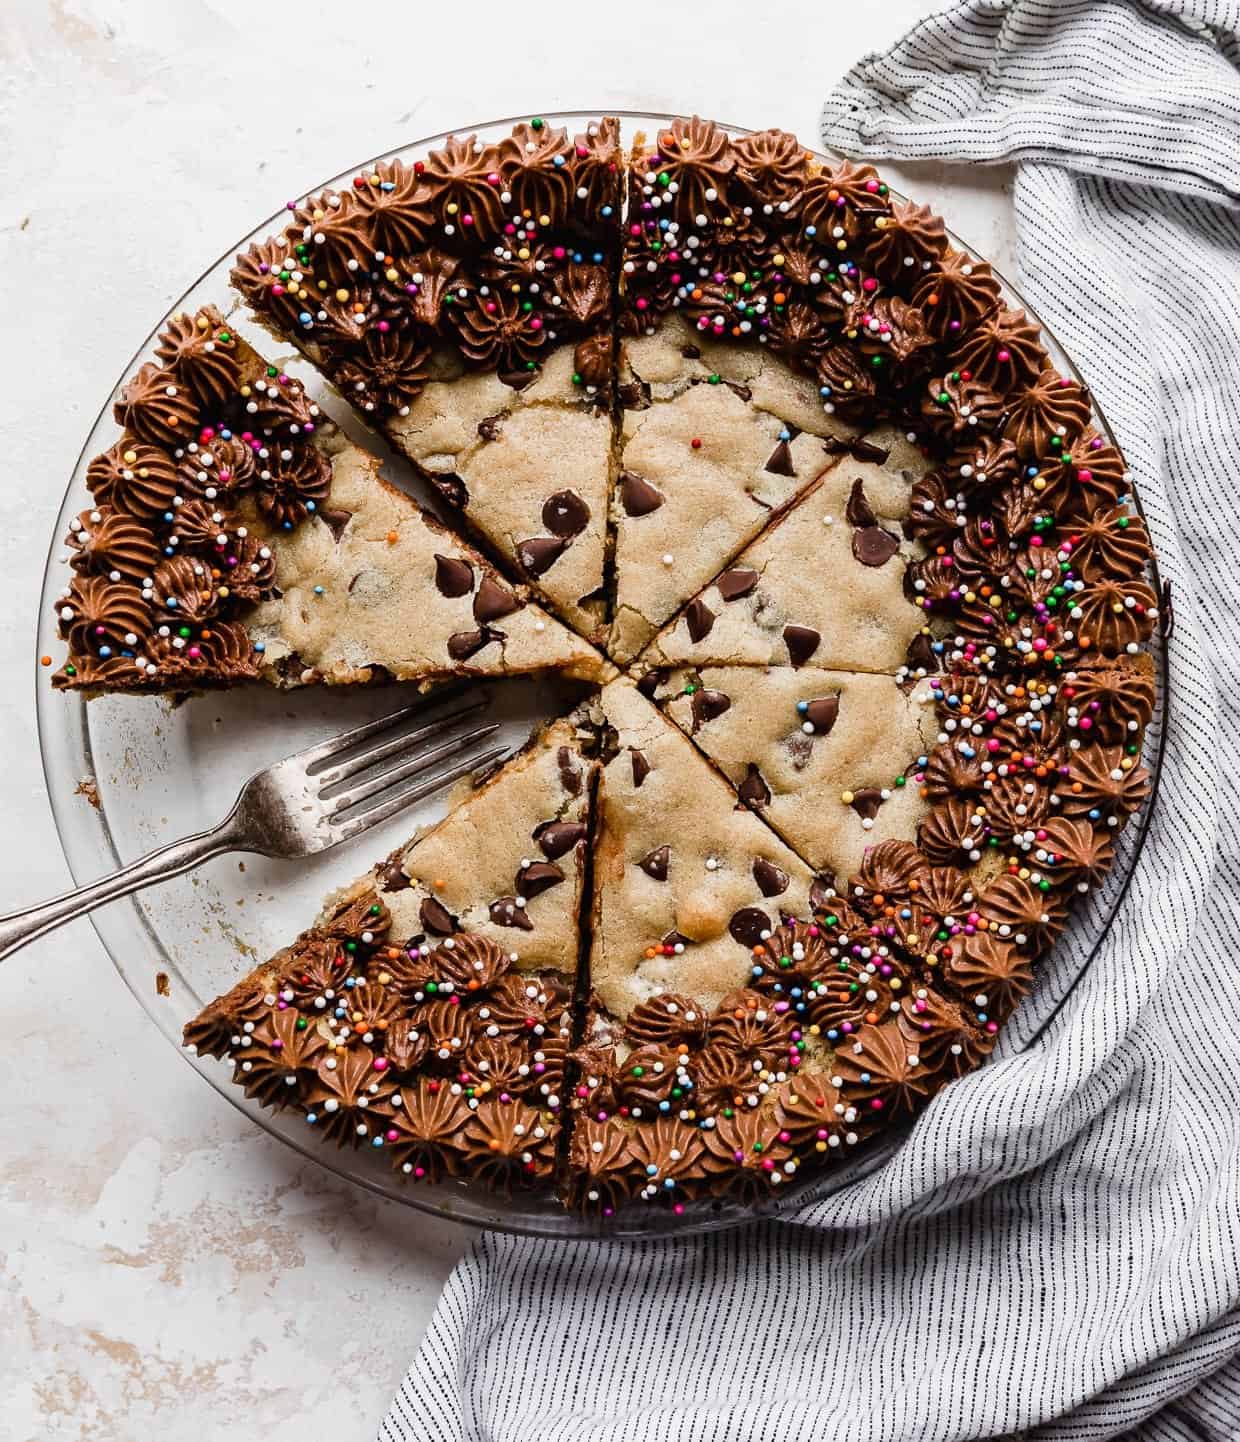 A Chocolate Chip Cookie Cake Recipe made in a pie plate with the cookie cake cut into wedges.